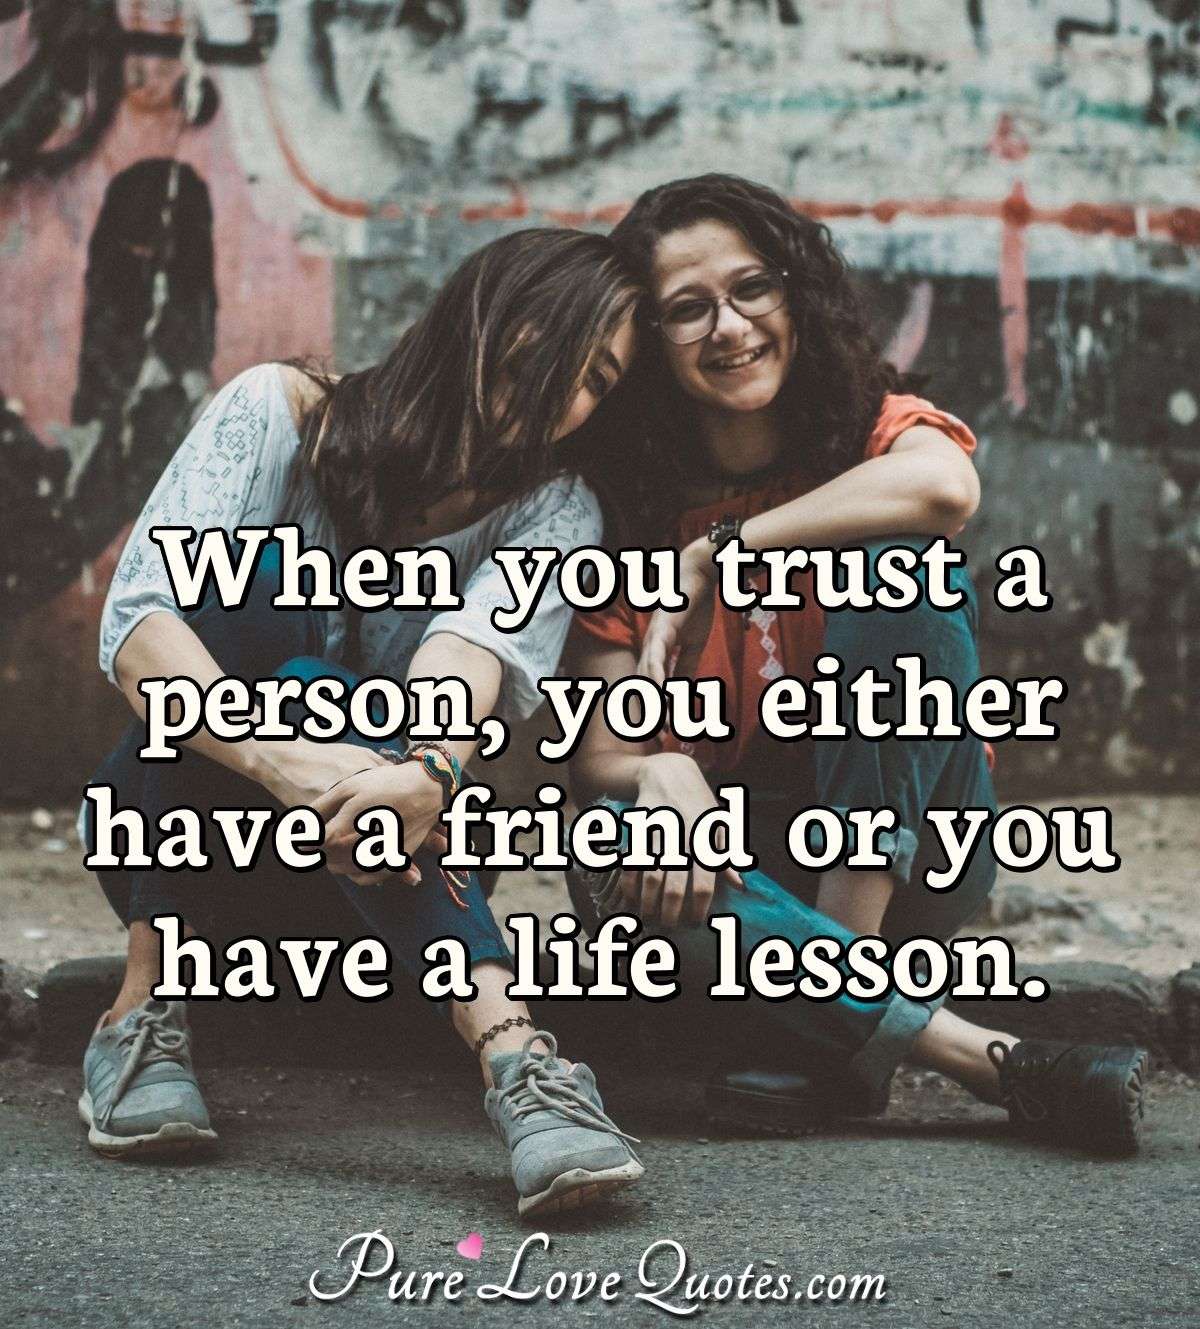 Incredible Collection of Friendship Quotes Images - Top 999 ...